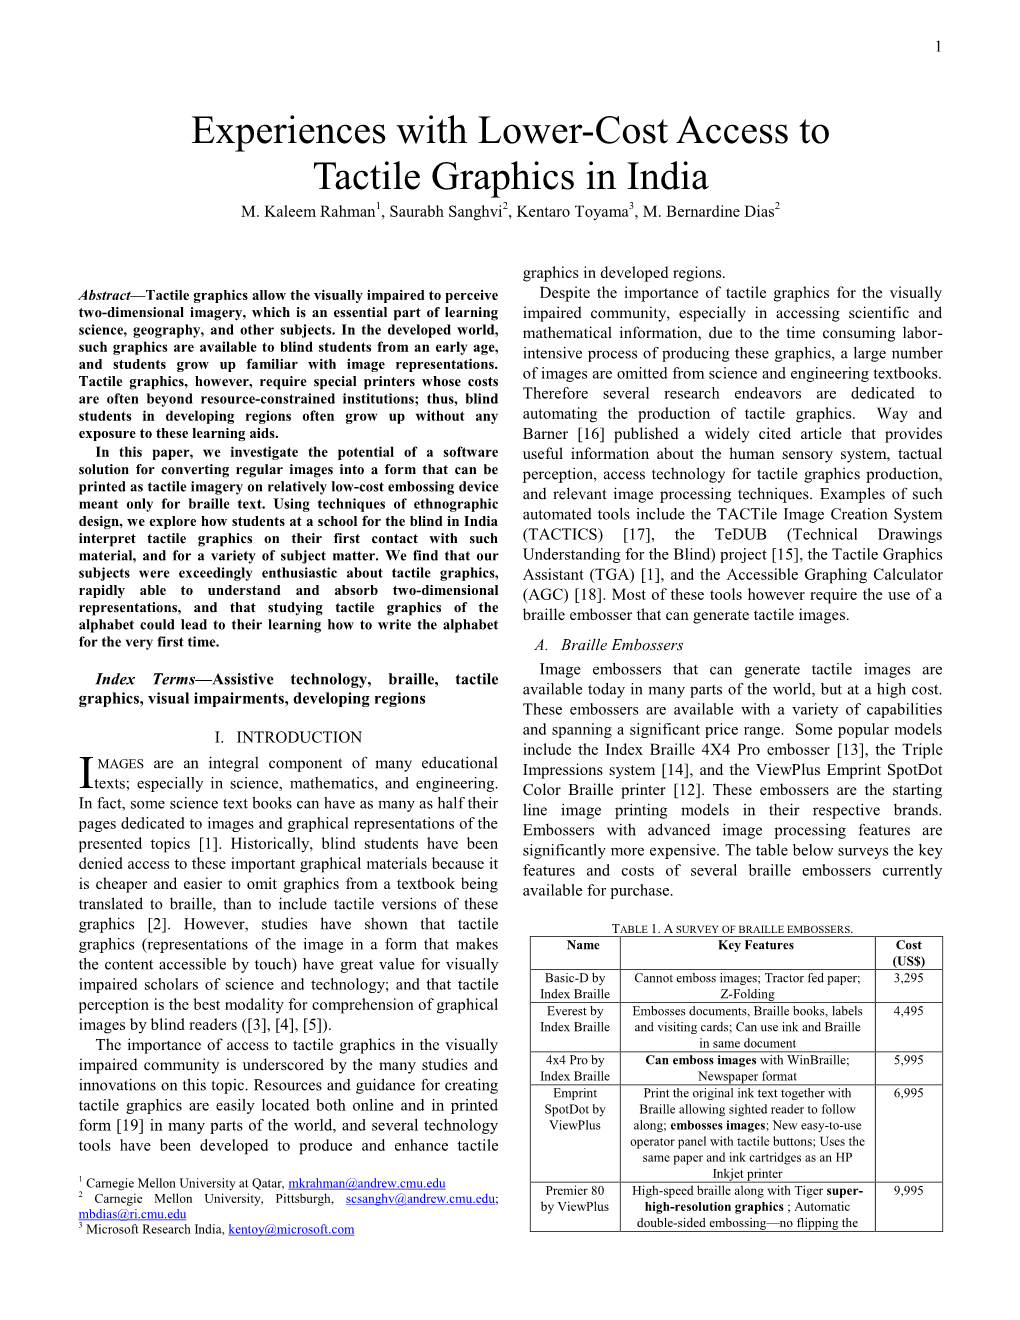 Experiences with Lower-Cost Access to Tactile Graphics in India M